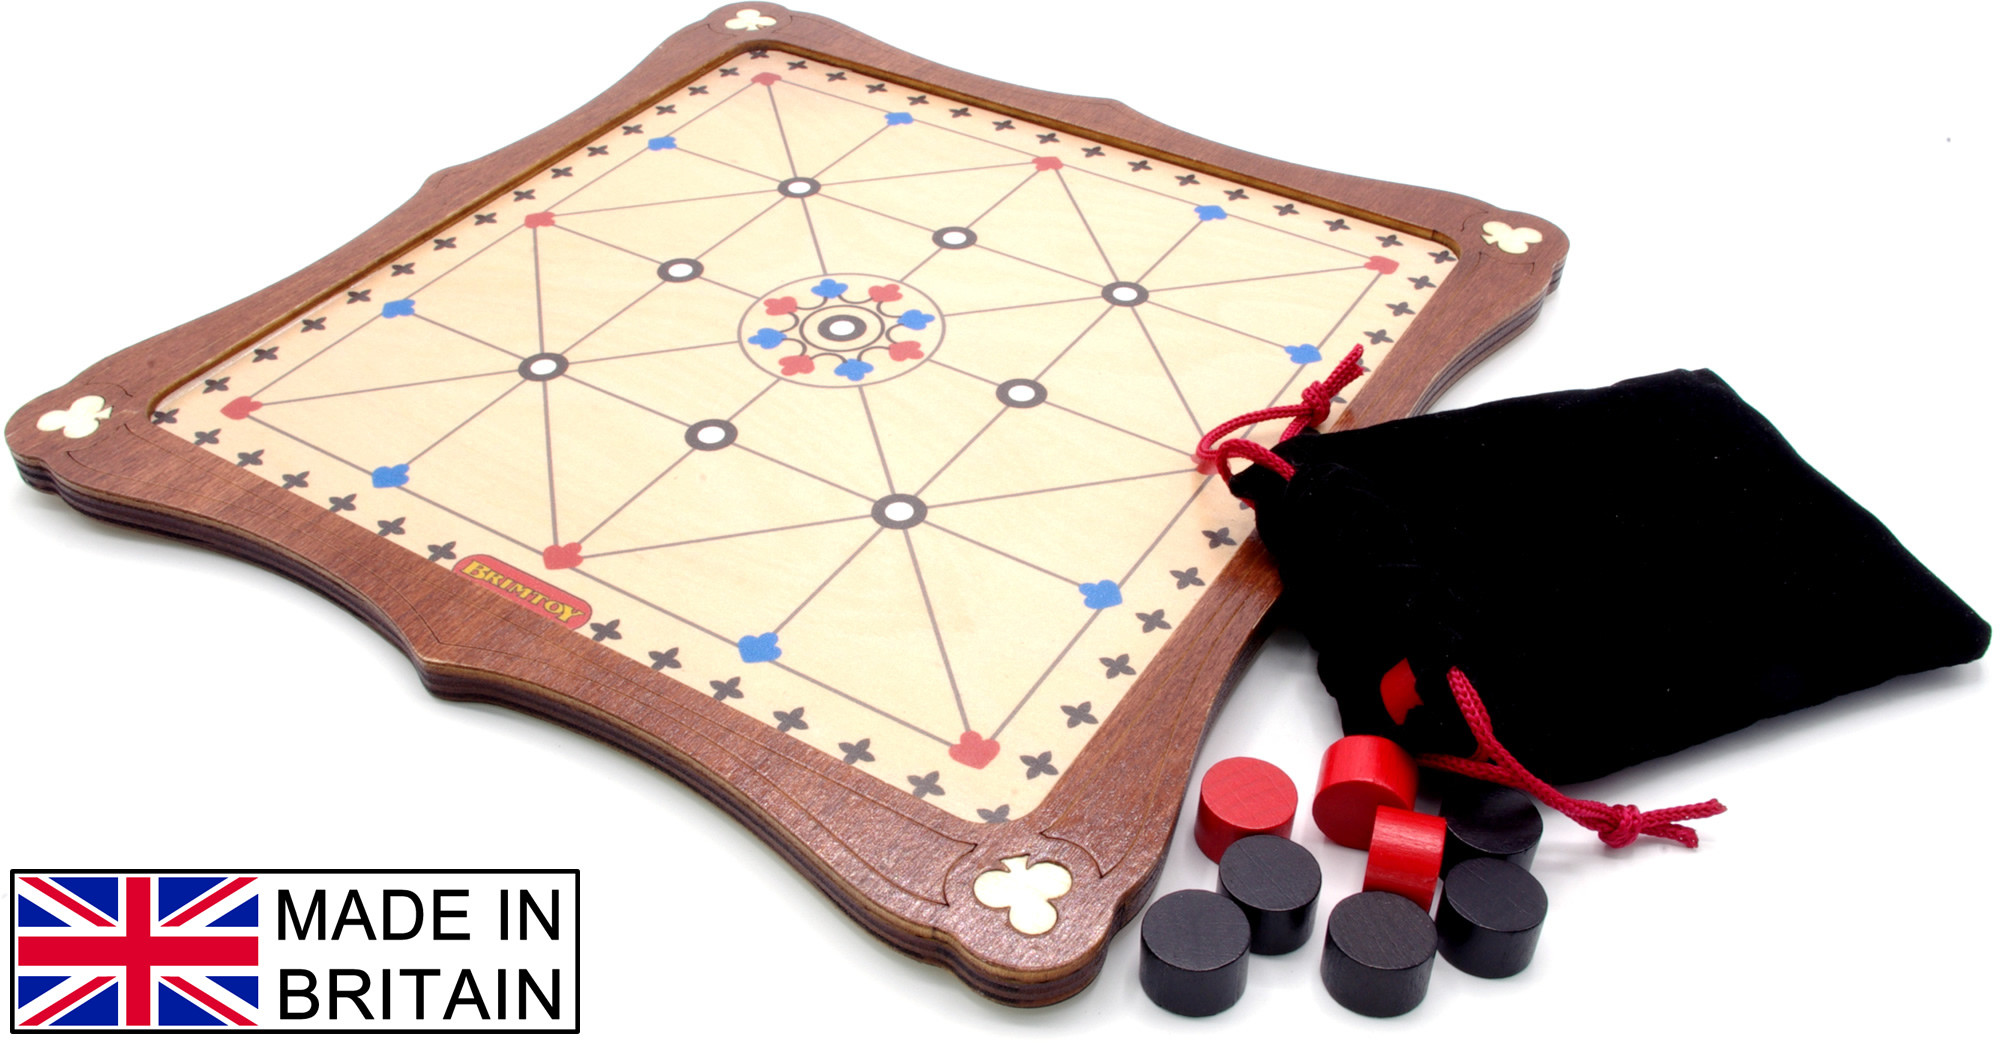 Alquerque traditional wooden board game